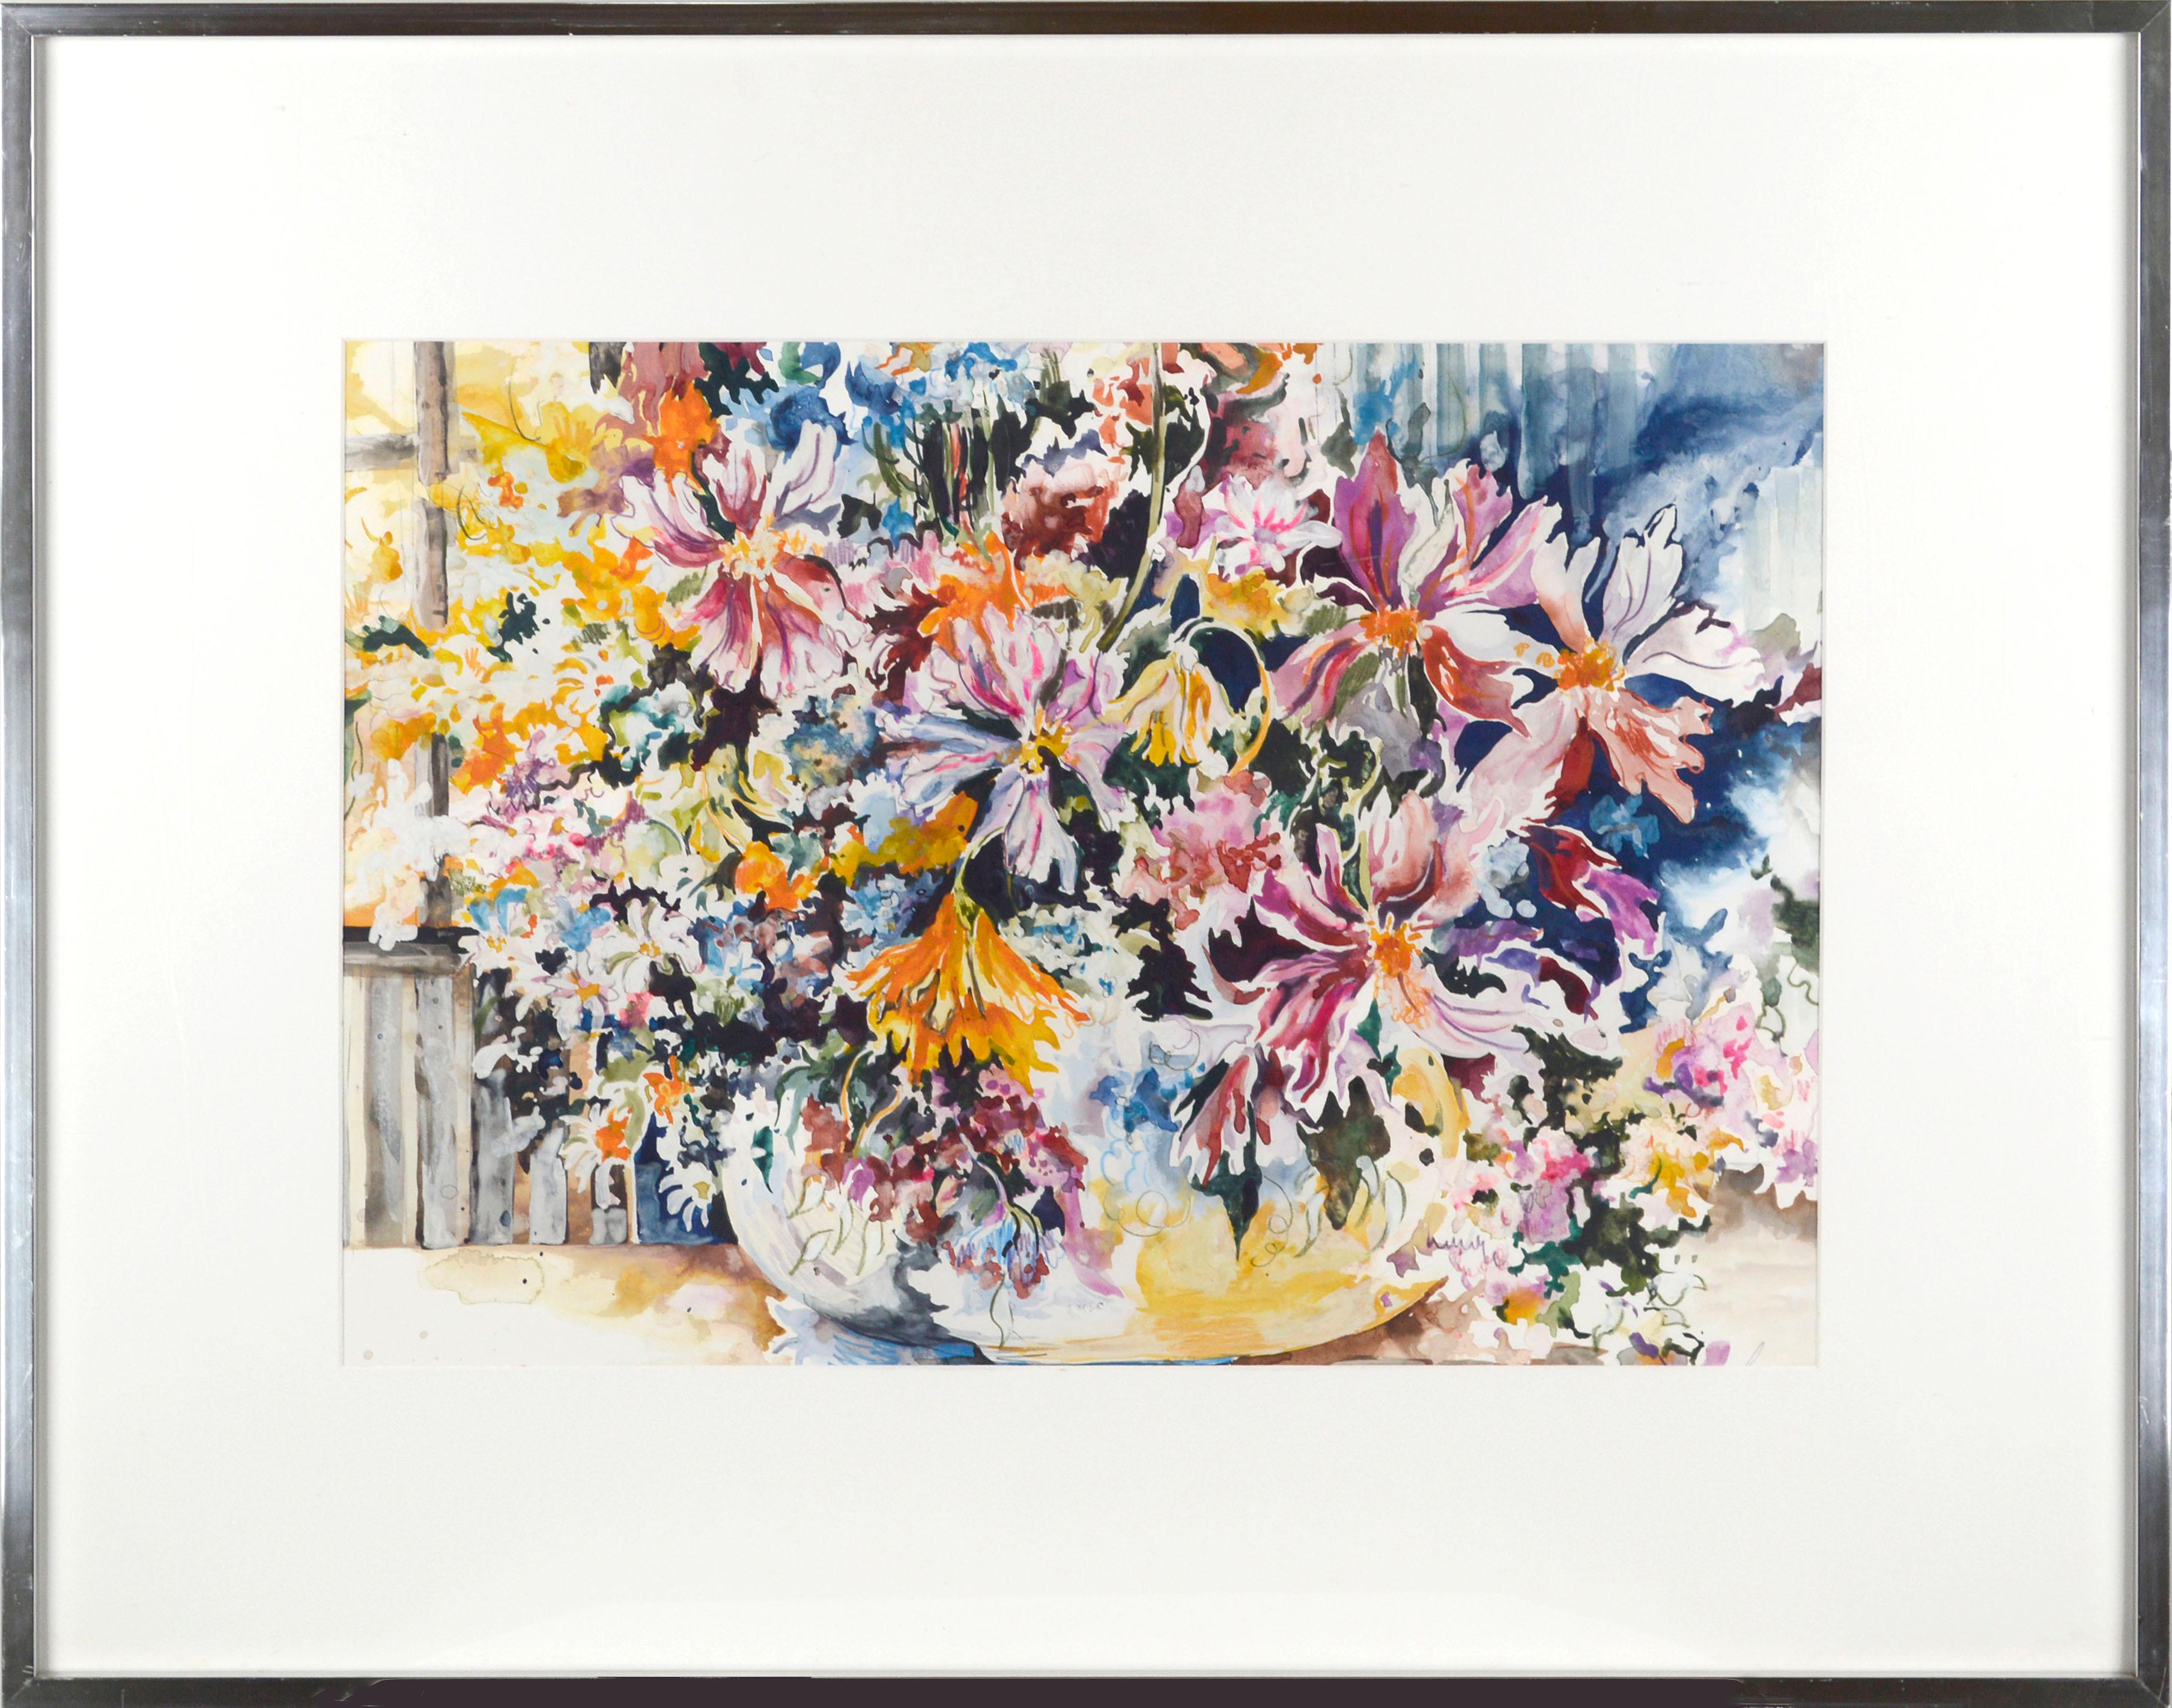 Spring Bouquet, Large-Scale Floral Watercolor Still Life 